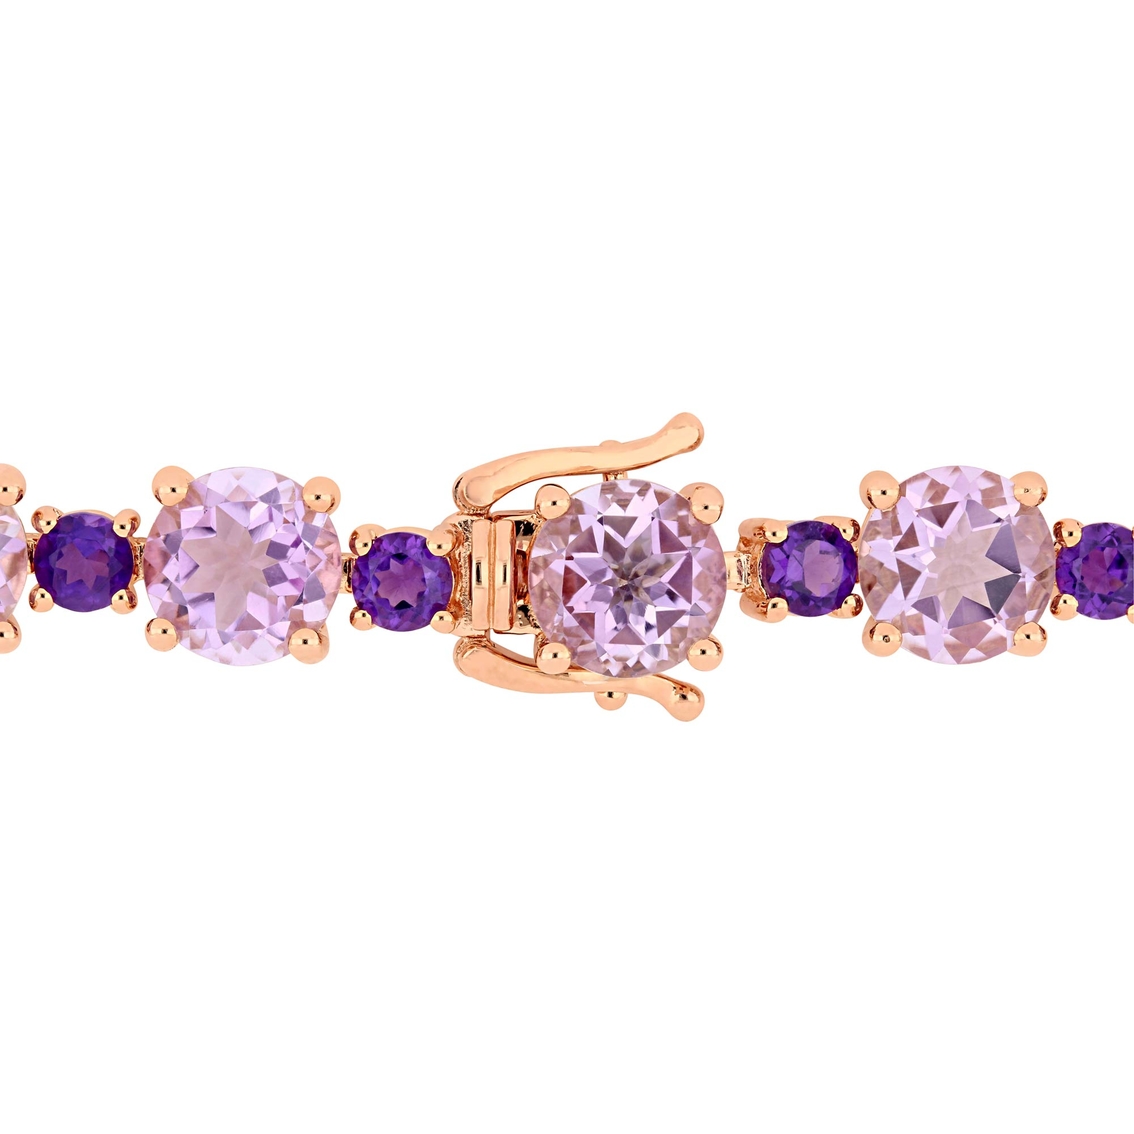 Sofia B. Rose Gold Over Sterling Silver and Amethyst Tennis Bracelet - Image 2 of 3